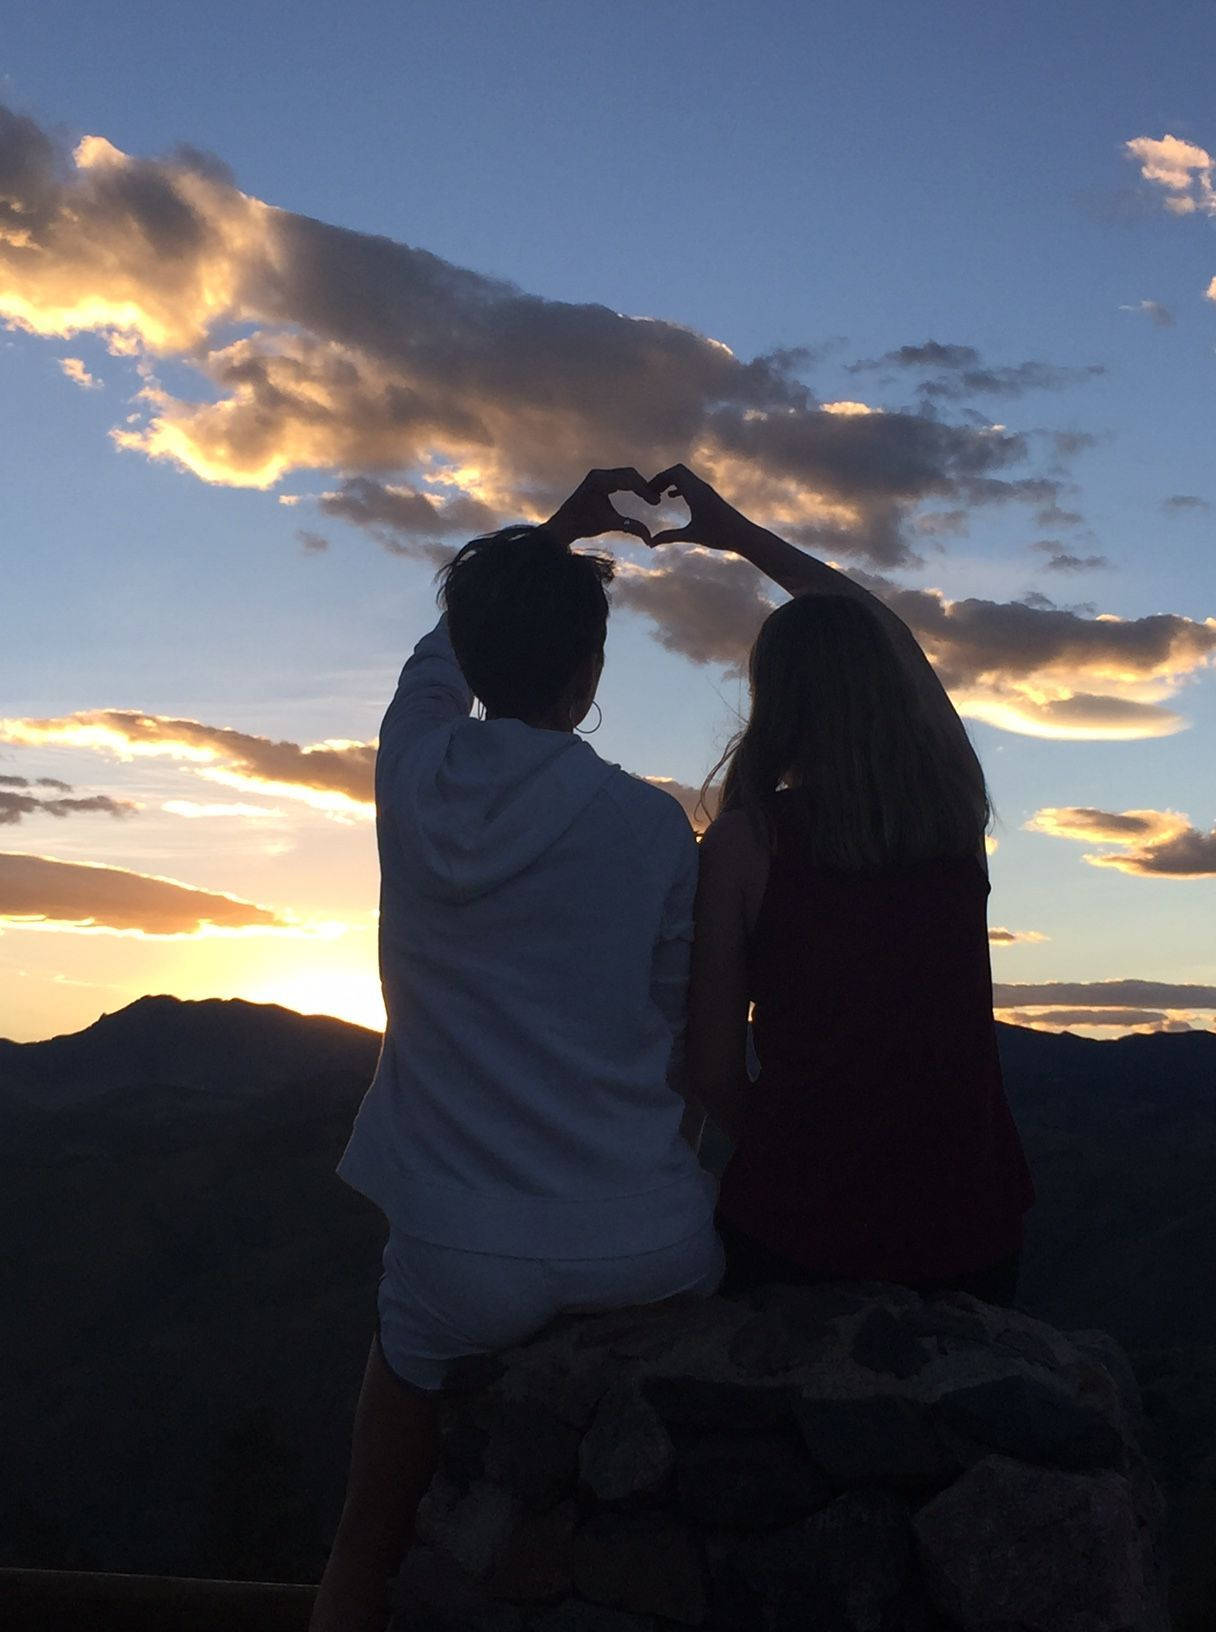 Cute Couple Making Heart At Sunset Background